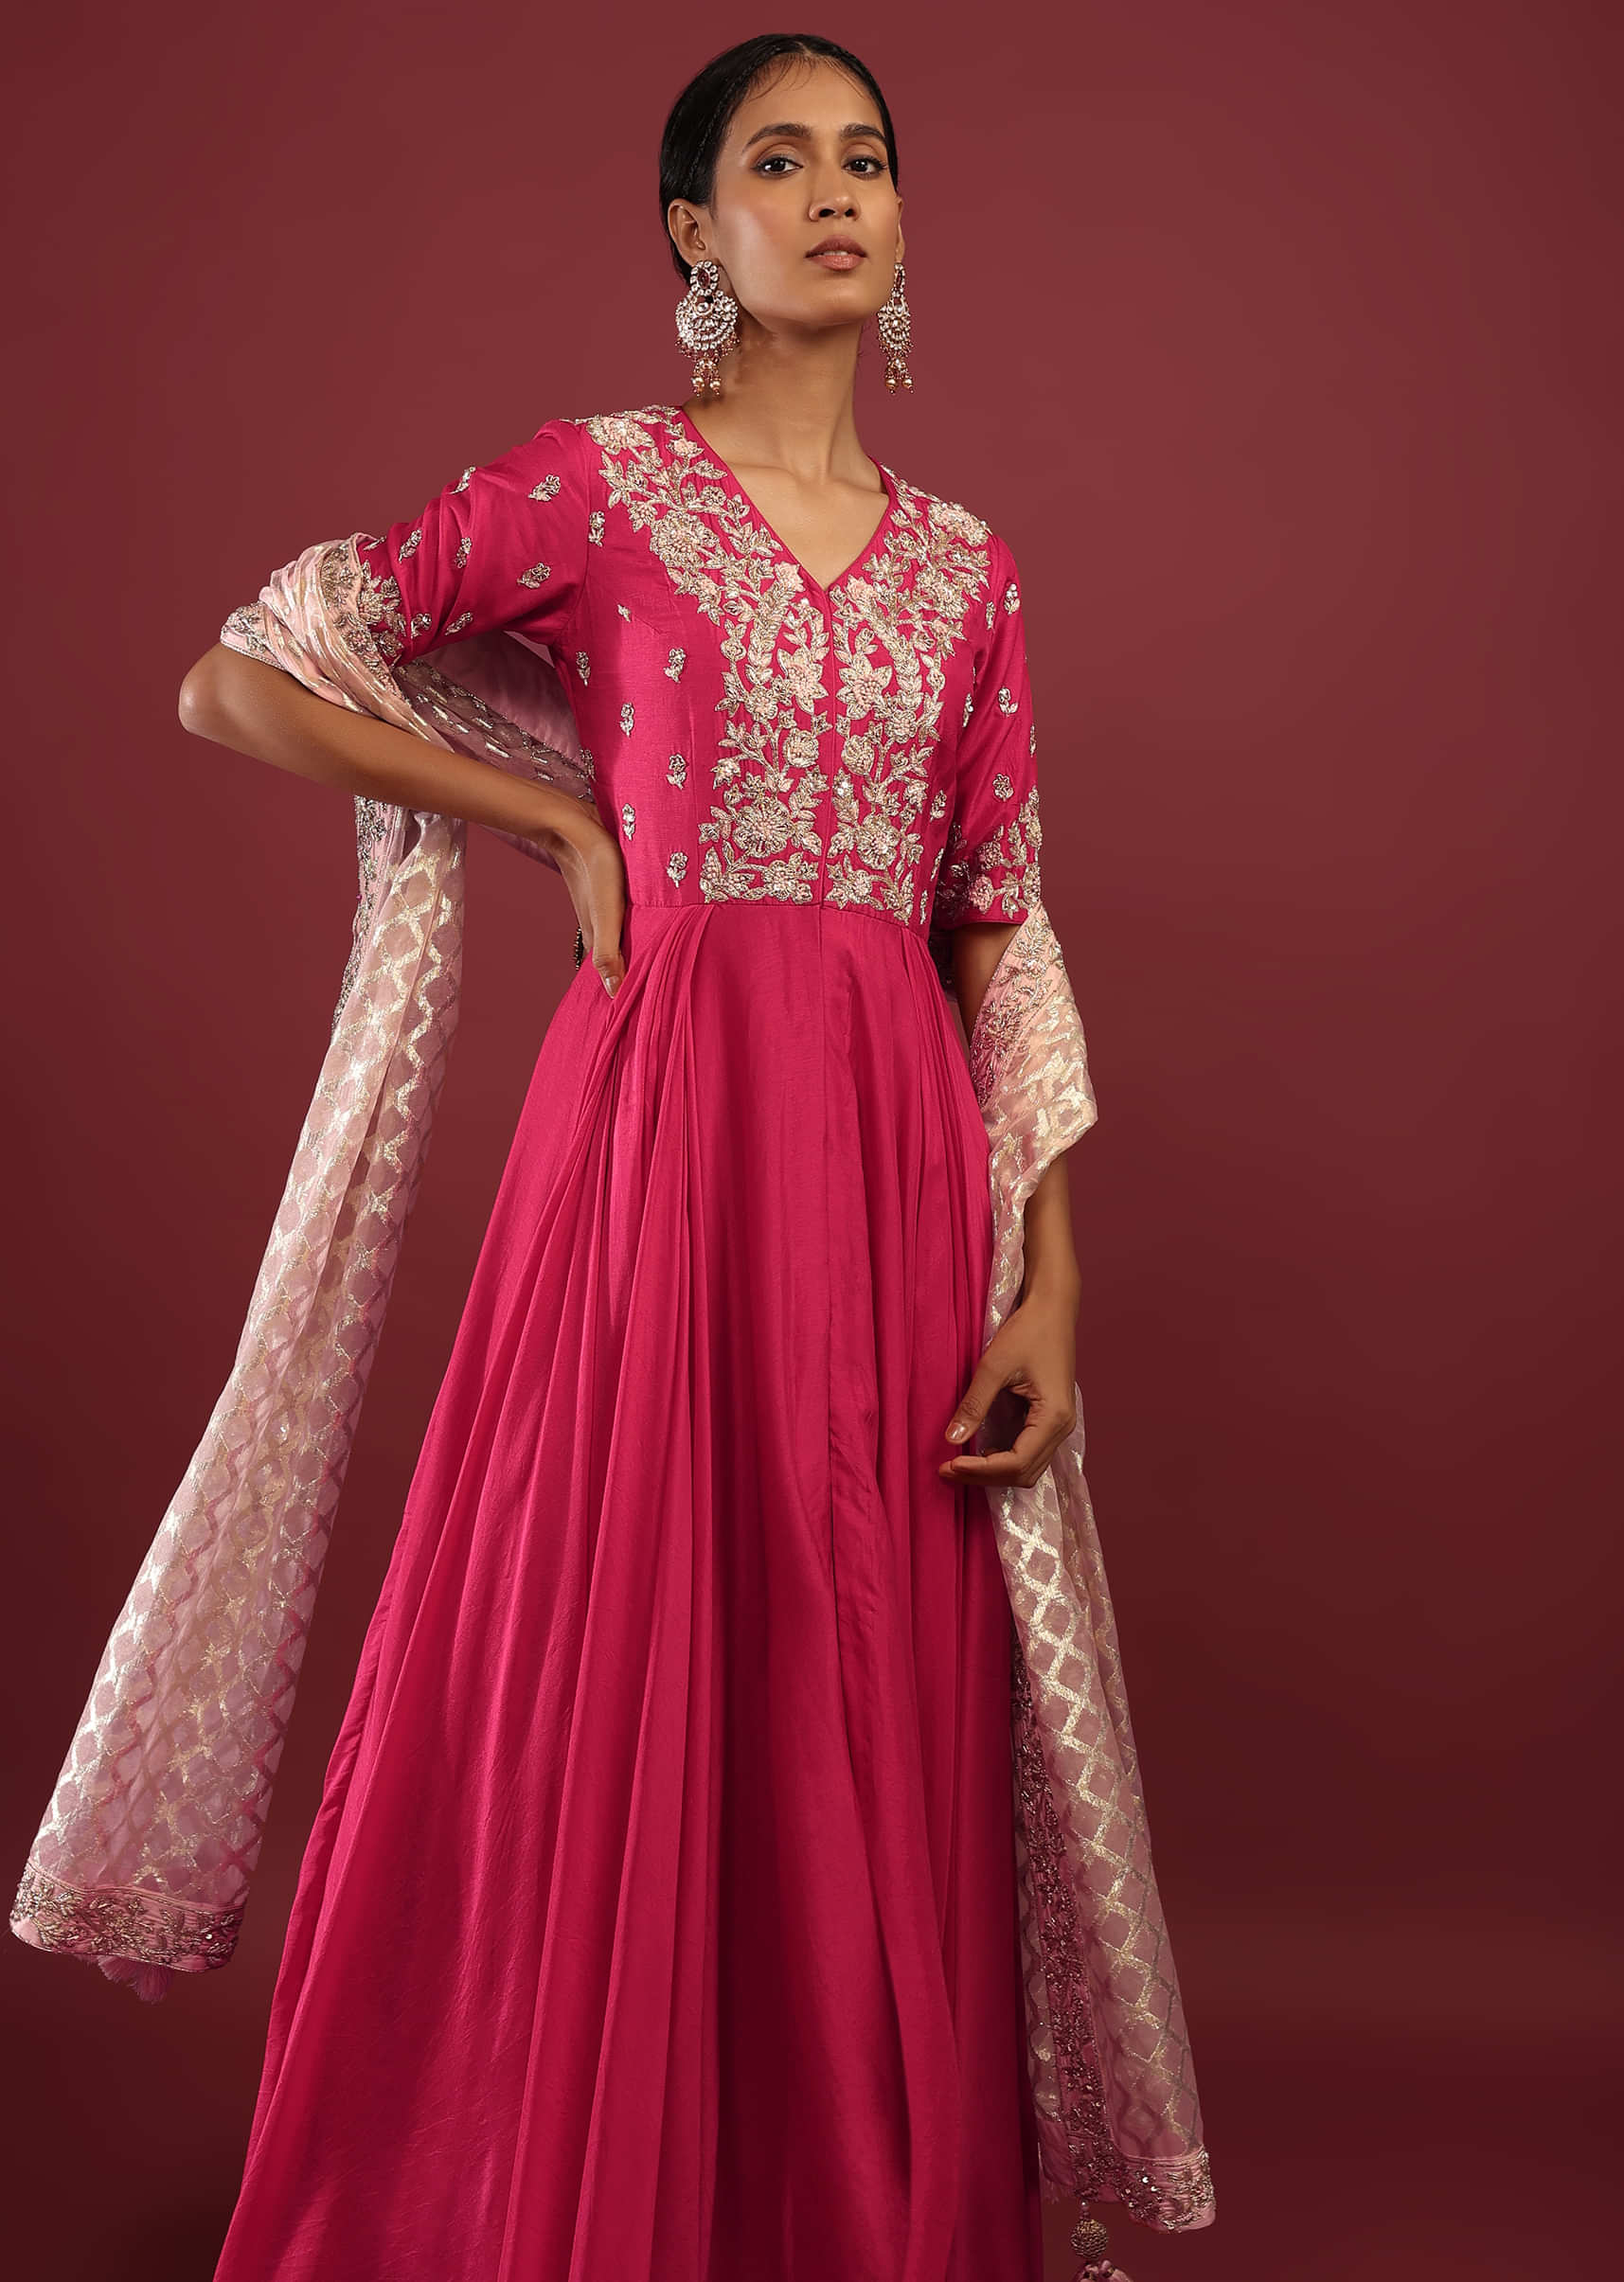 Rani Pink High Low Anarkali Suit With A Front Slit, Zardosi Embroidered Flowers And Baby Pink Lurex Dupatta